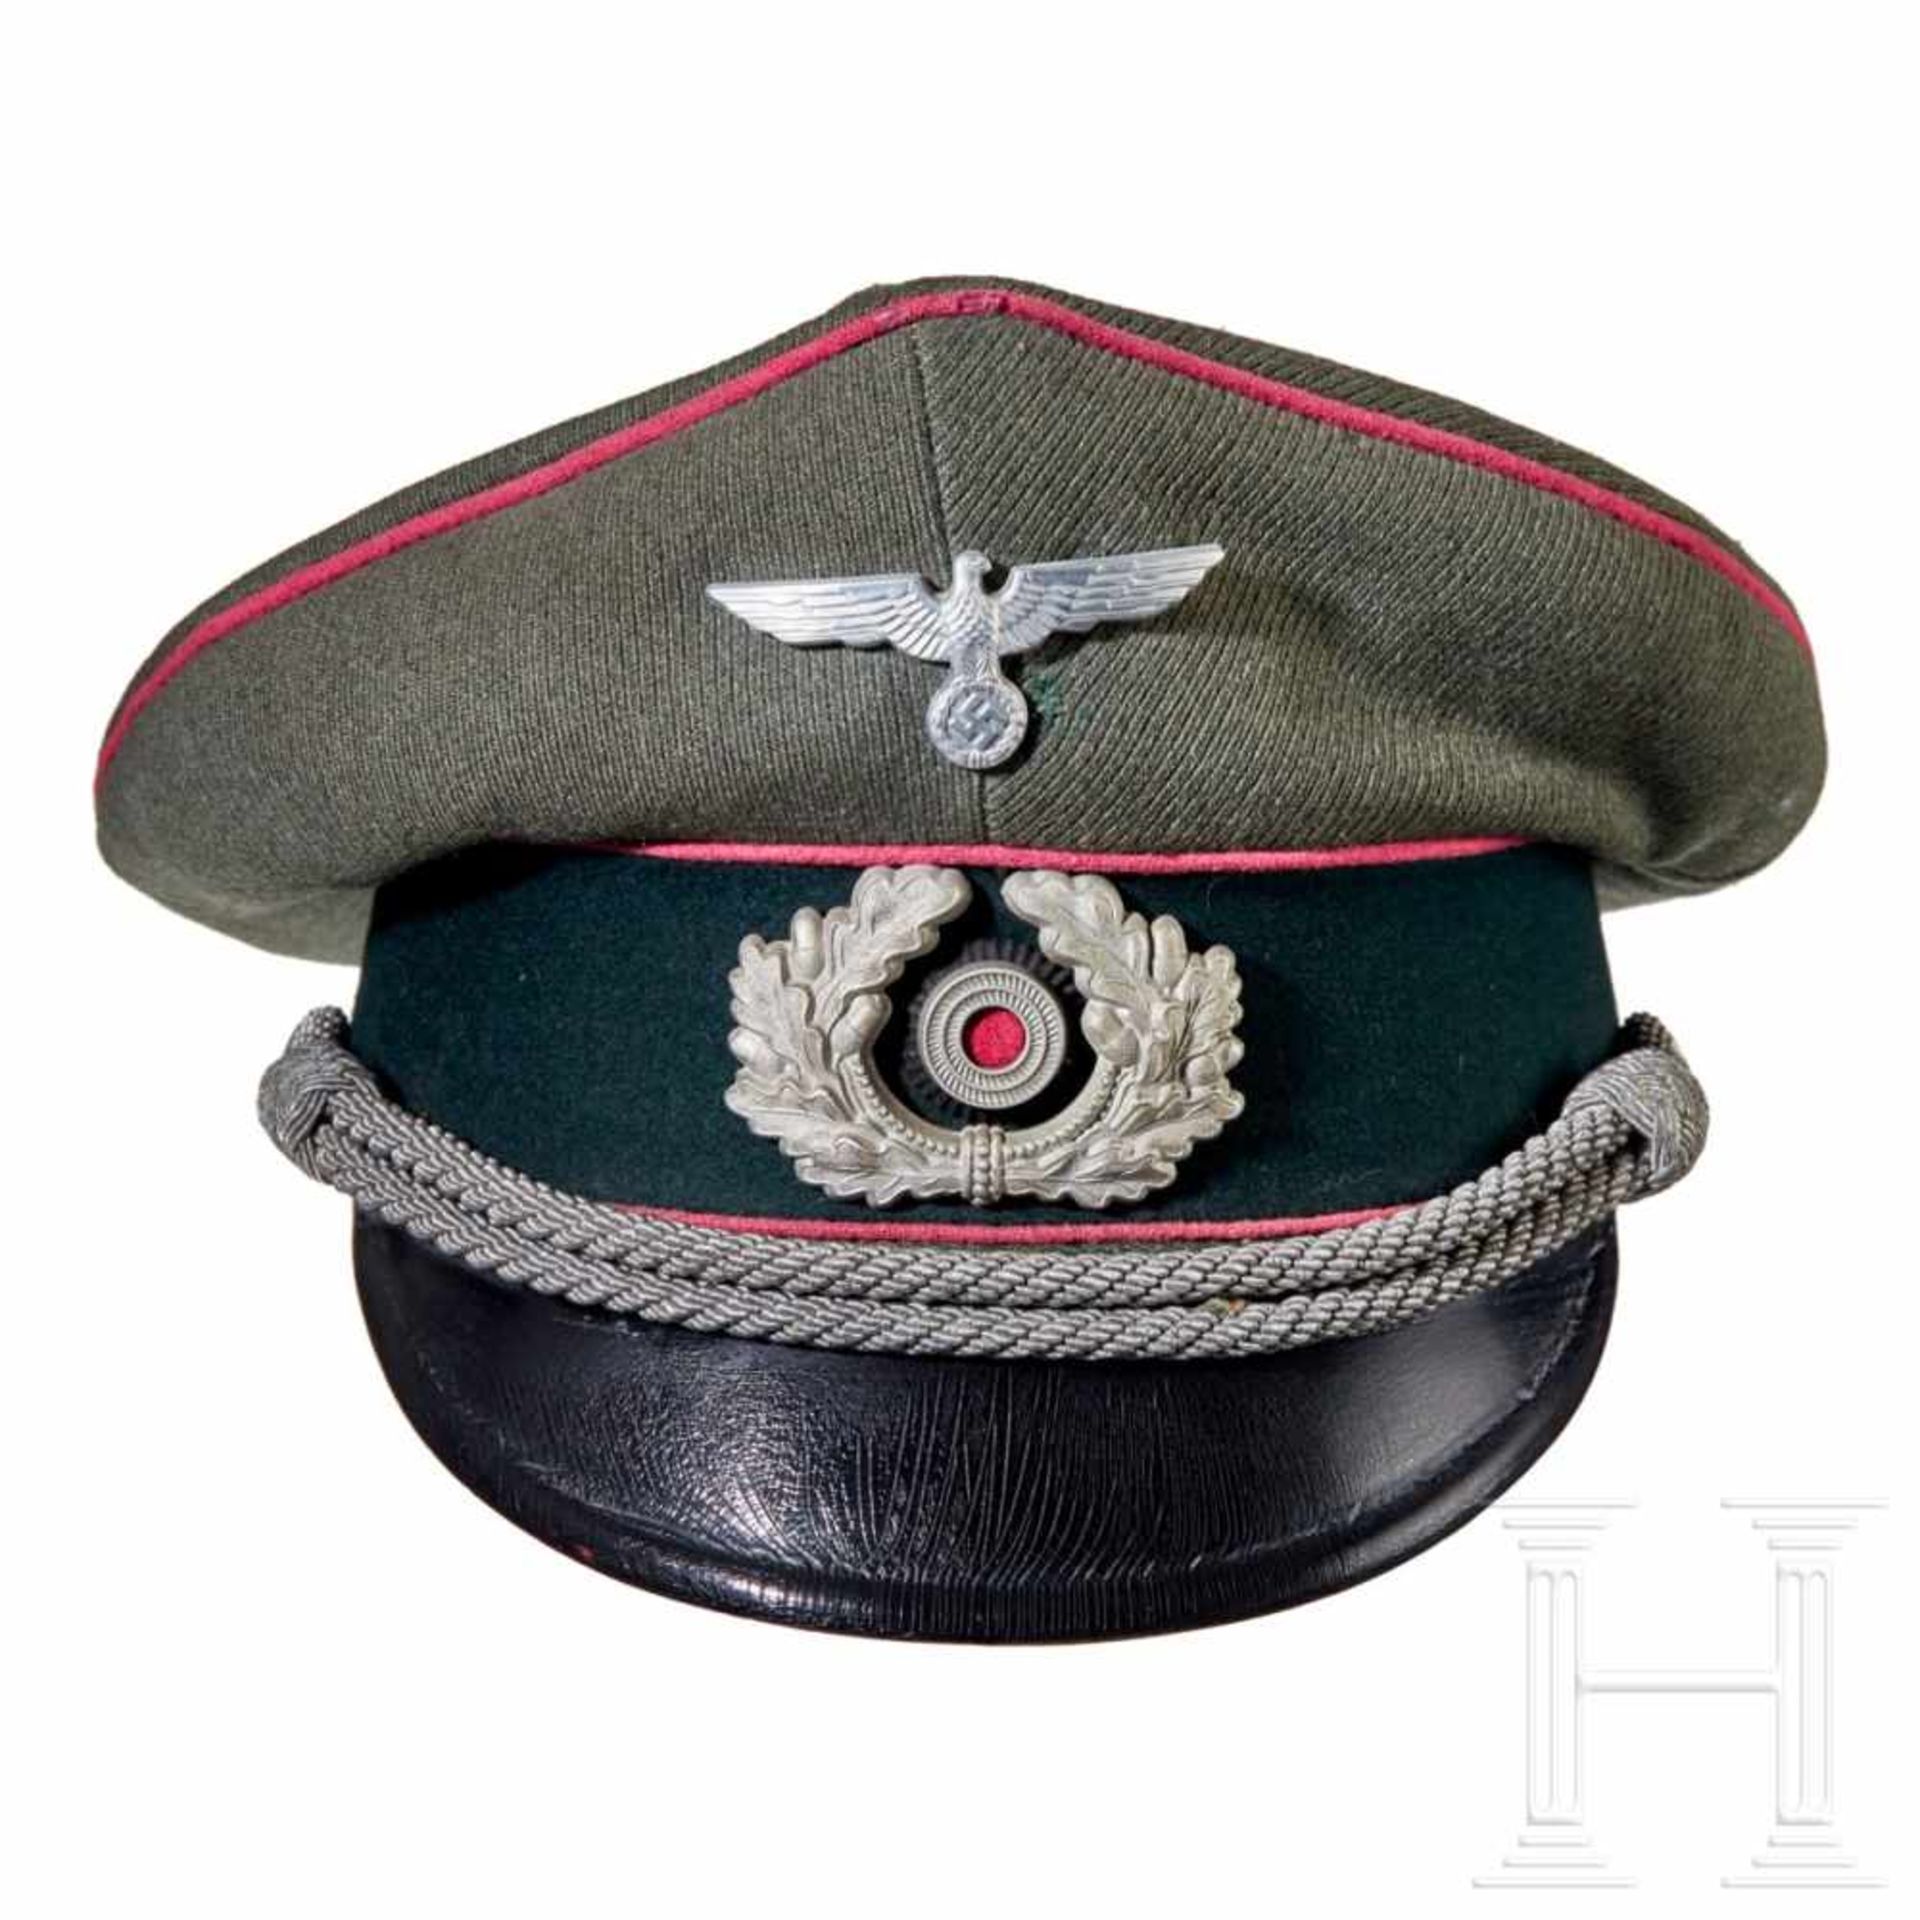 A visor cap for officers of the army, PanzerField-grey ribbed tricot wool body with dark green - Bild 4 aus 6